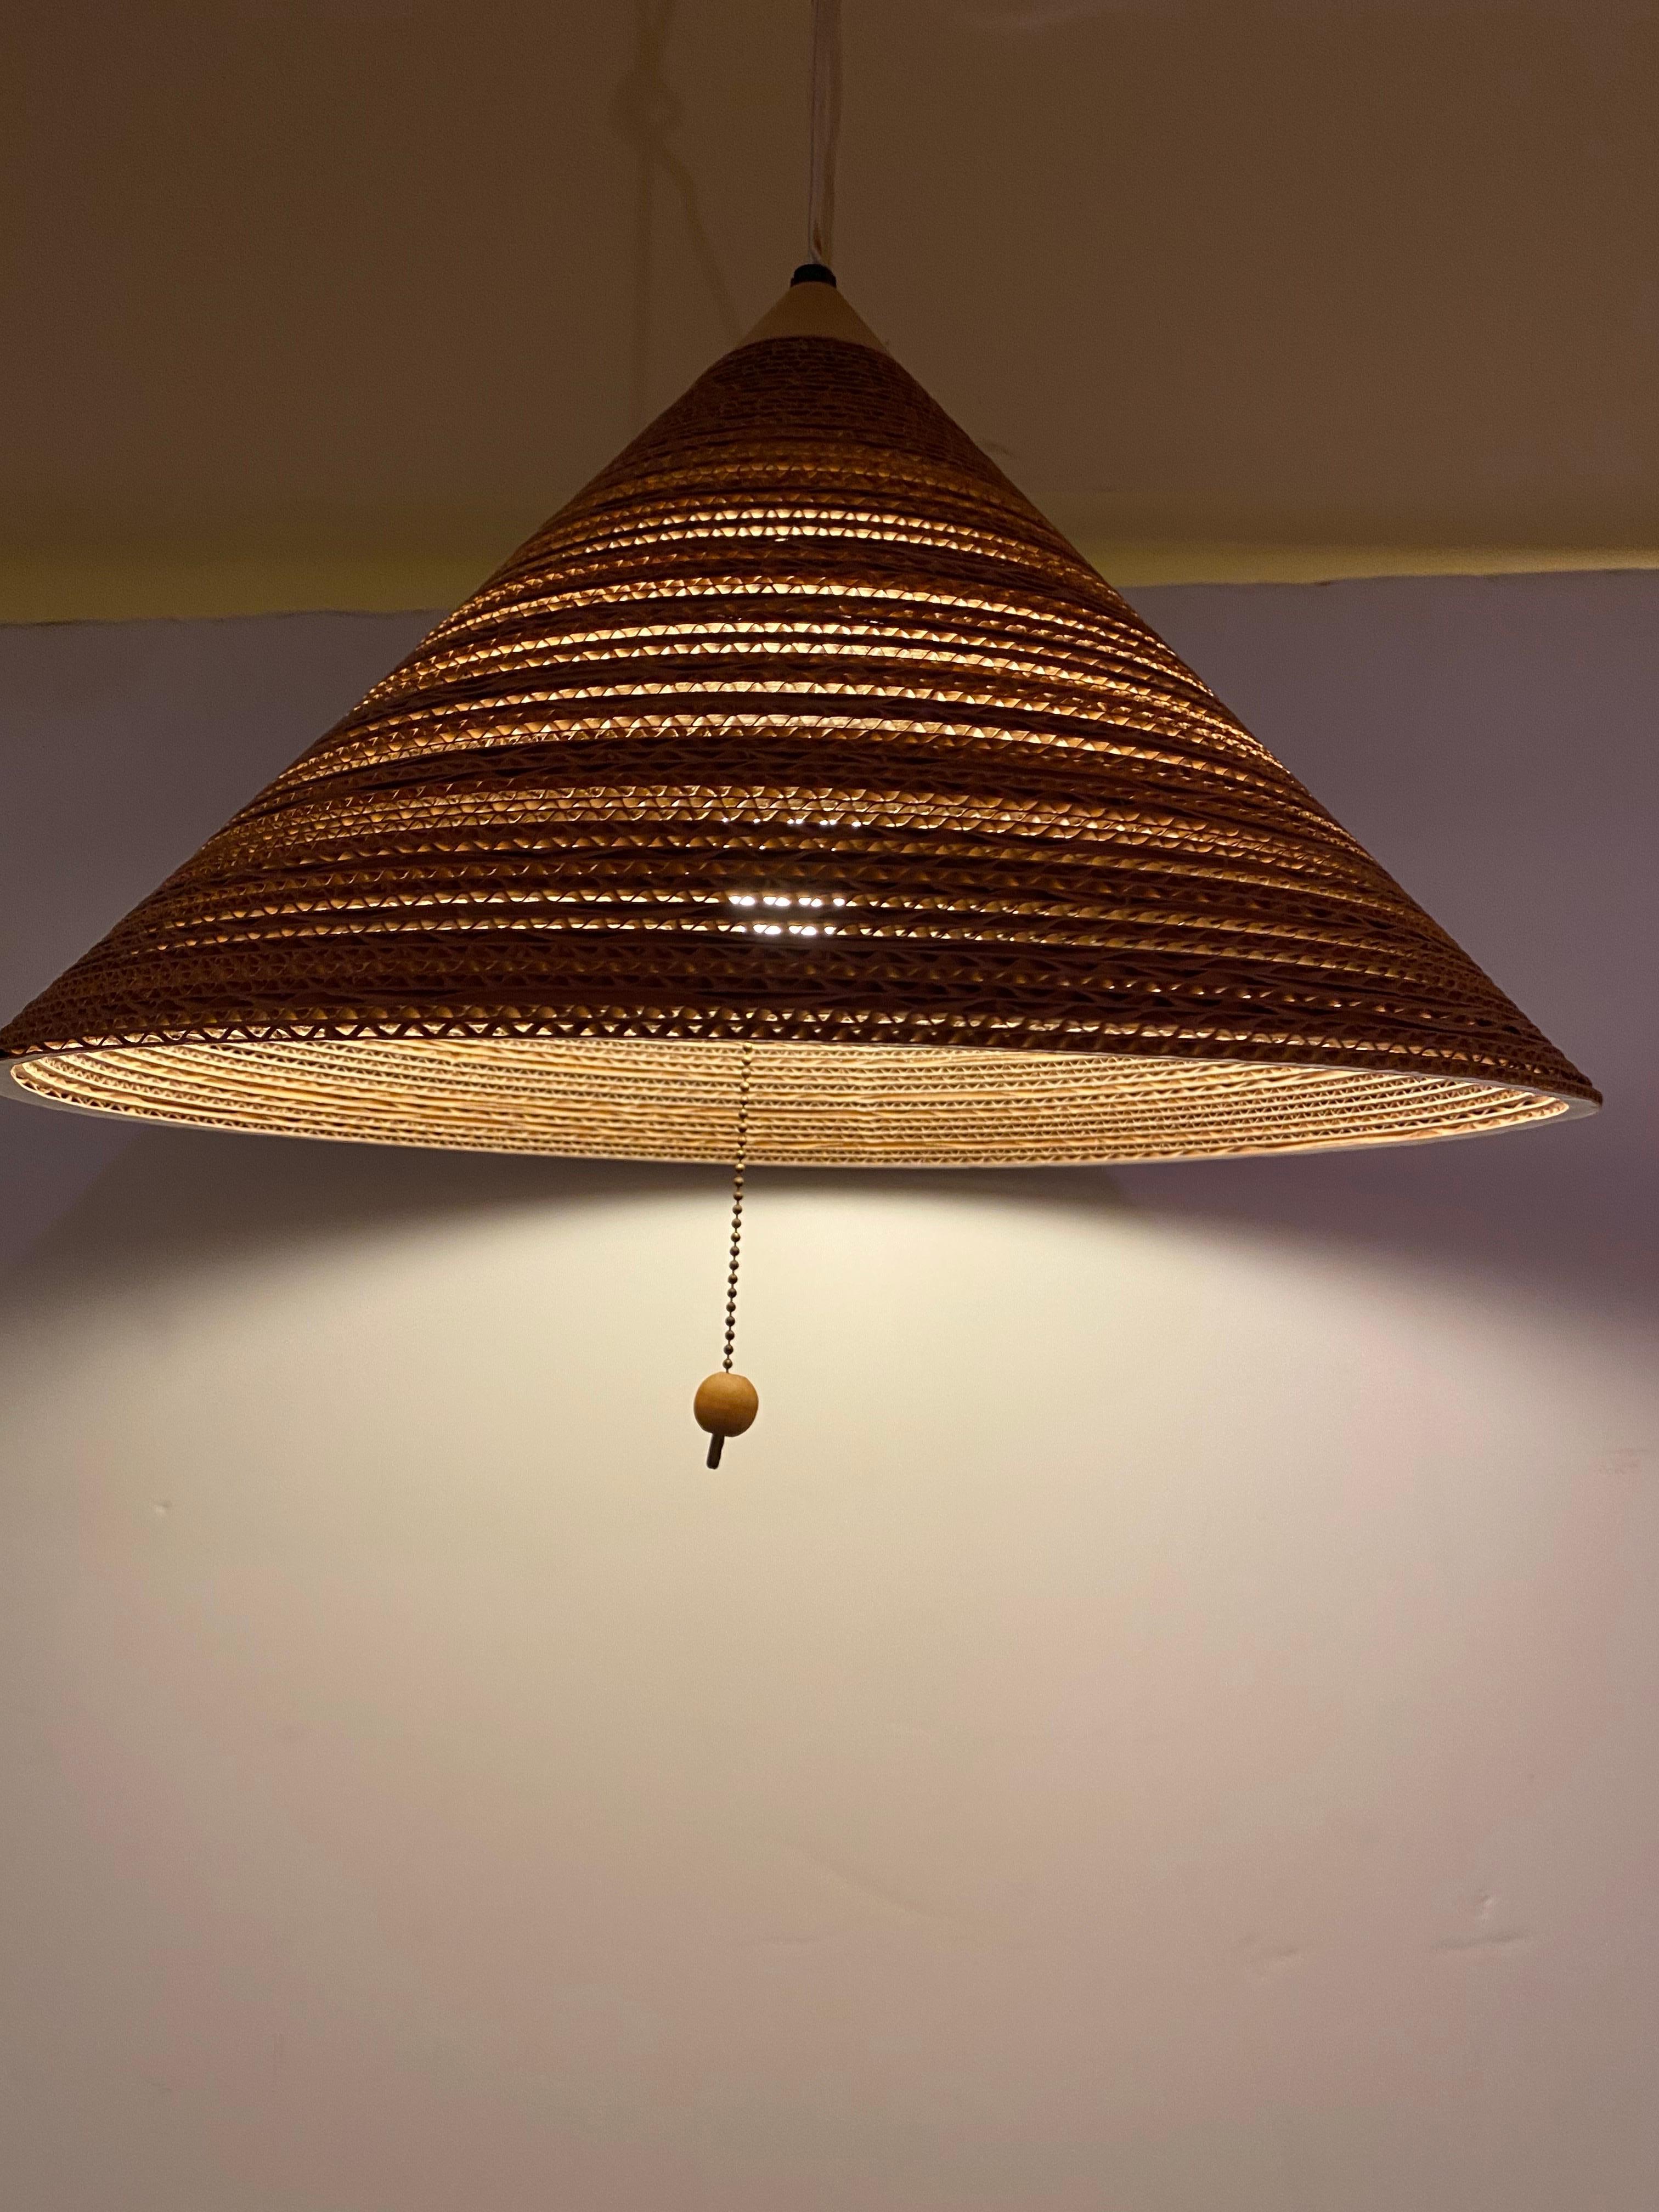 Gregory Van Pelt Stacked Cardboard hanging Fixture.  Wood cone top and hanging wood ball switch.  In nice original condition, iconic 1970's sensibilities and vibe.  Looks amazing when lit!  Perfect accent over your table.  Currently set up as a plug